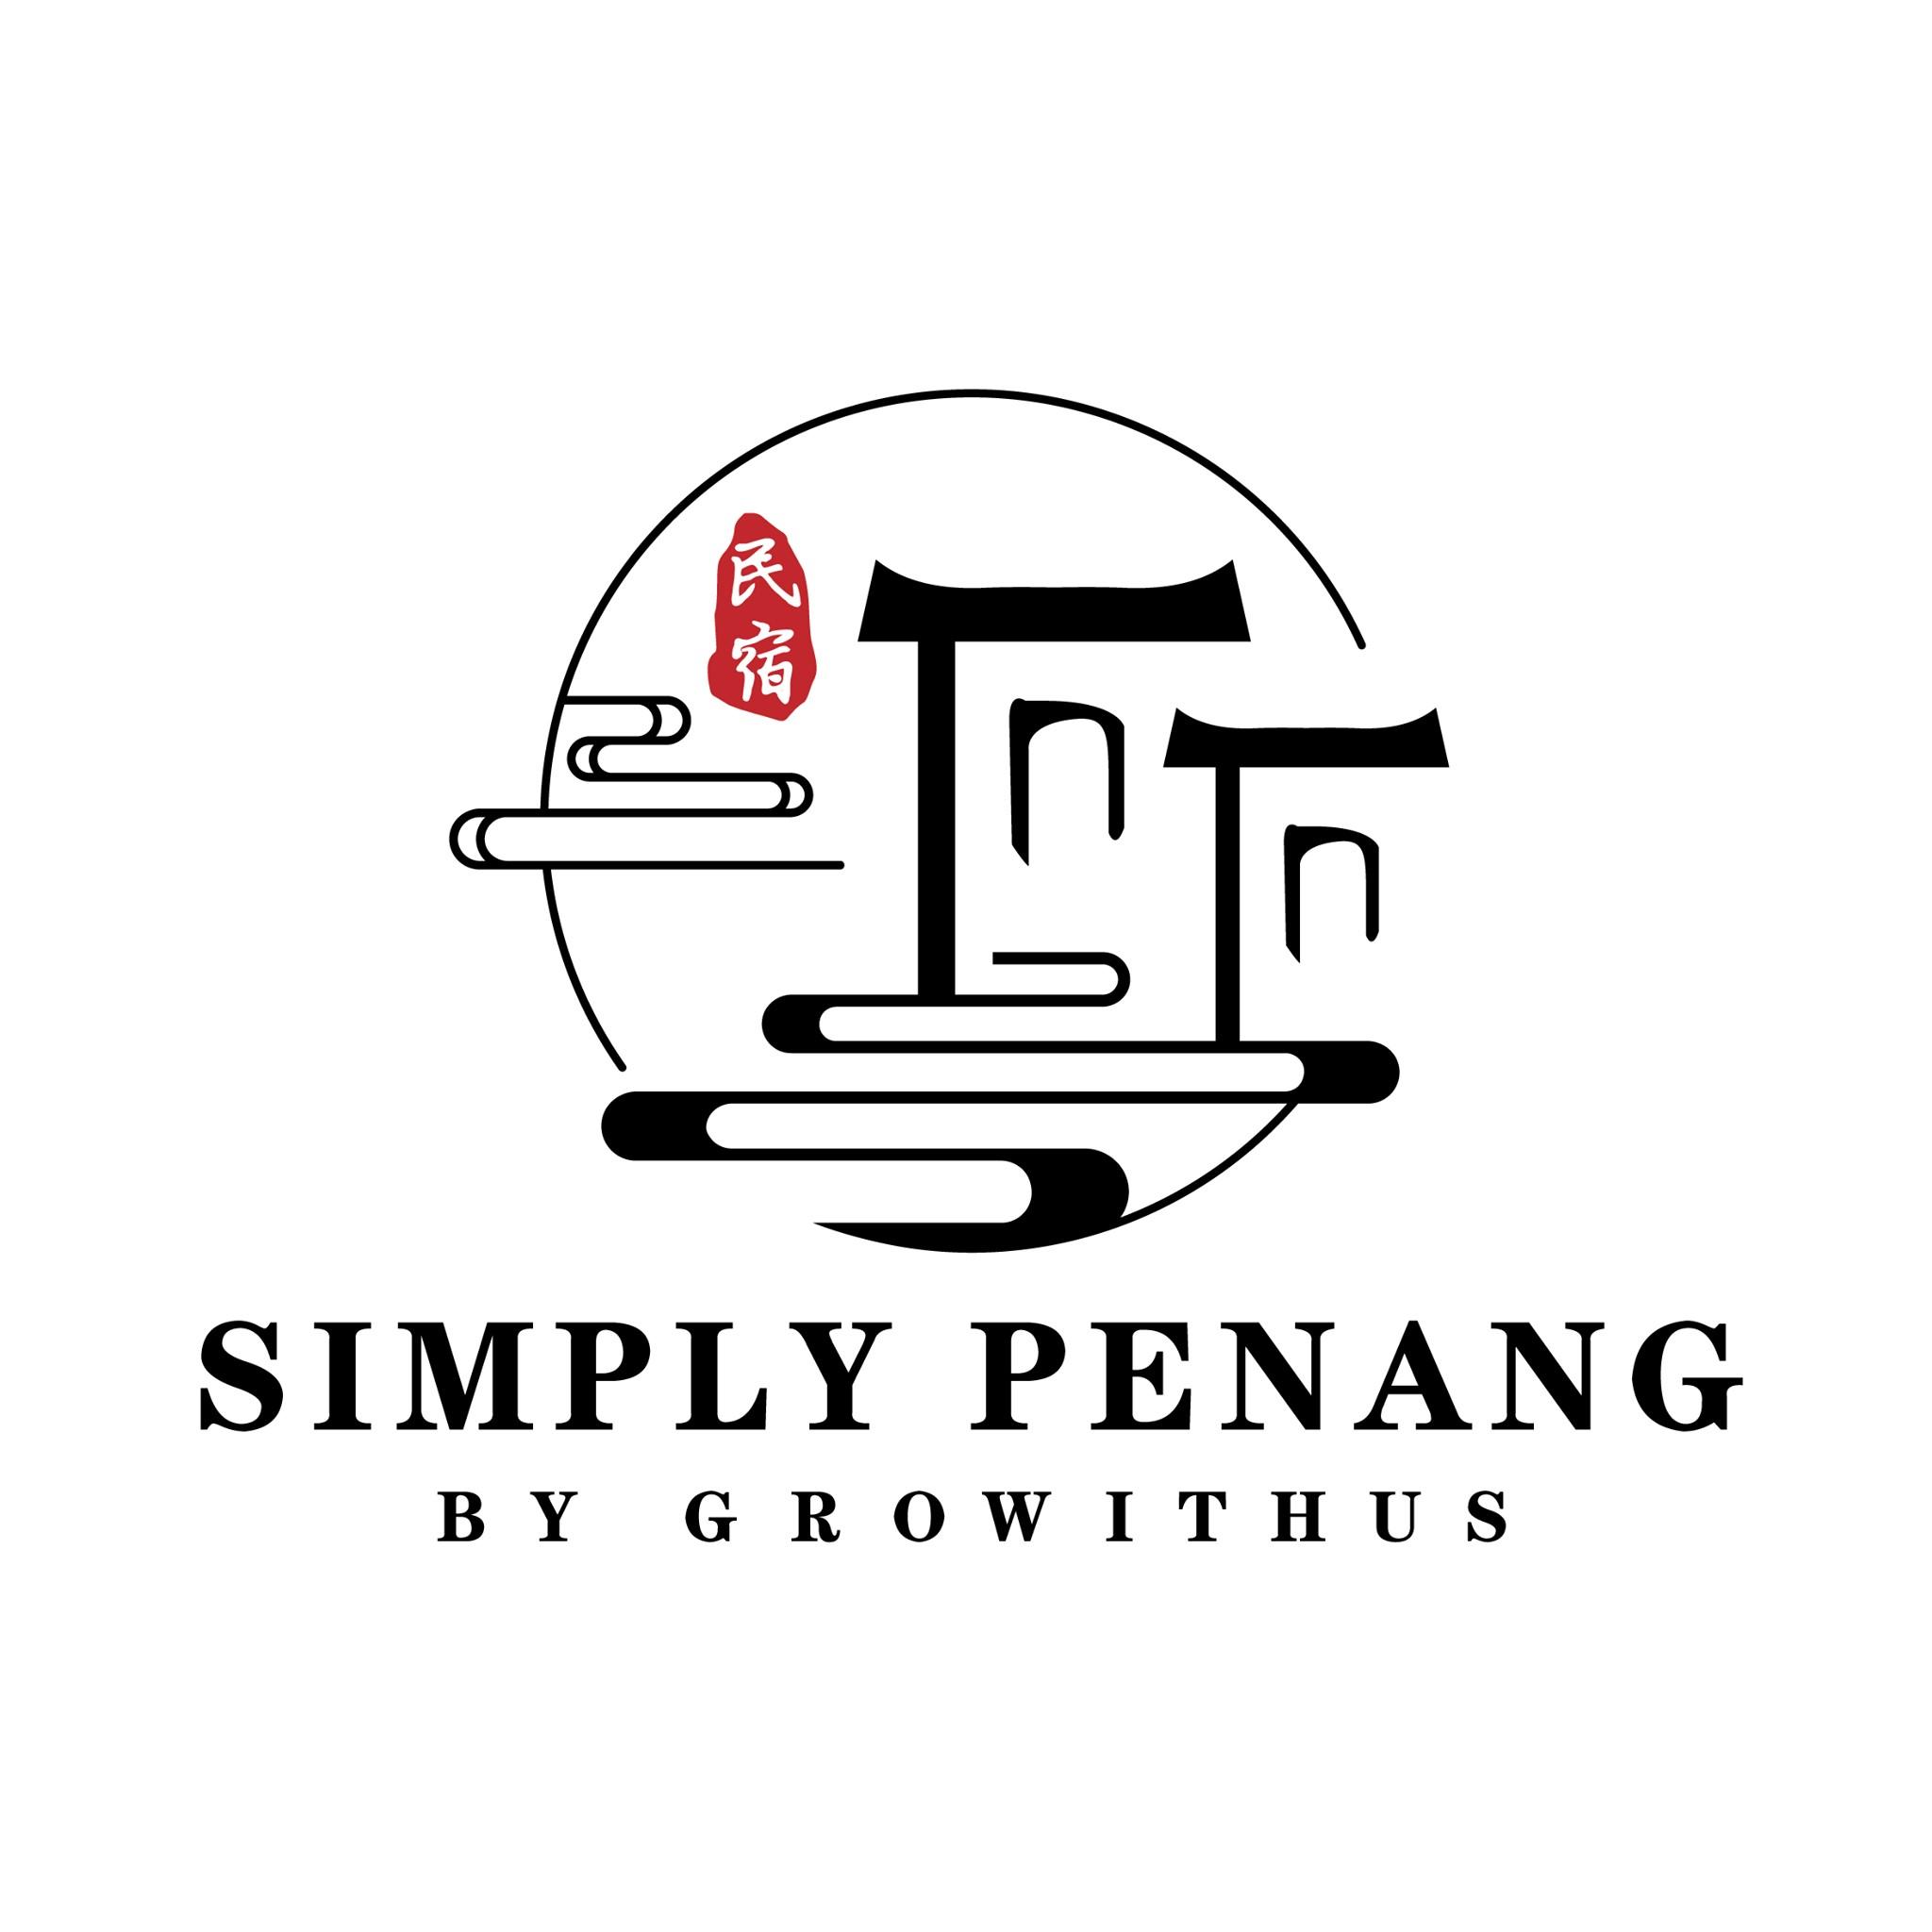 Simply Penang by Growithus